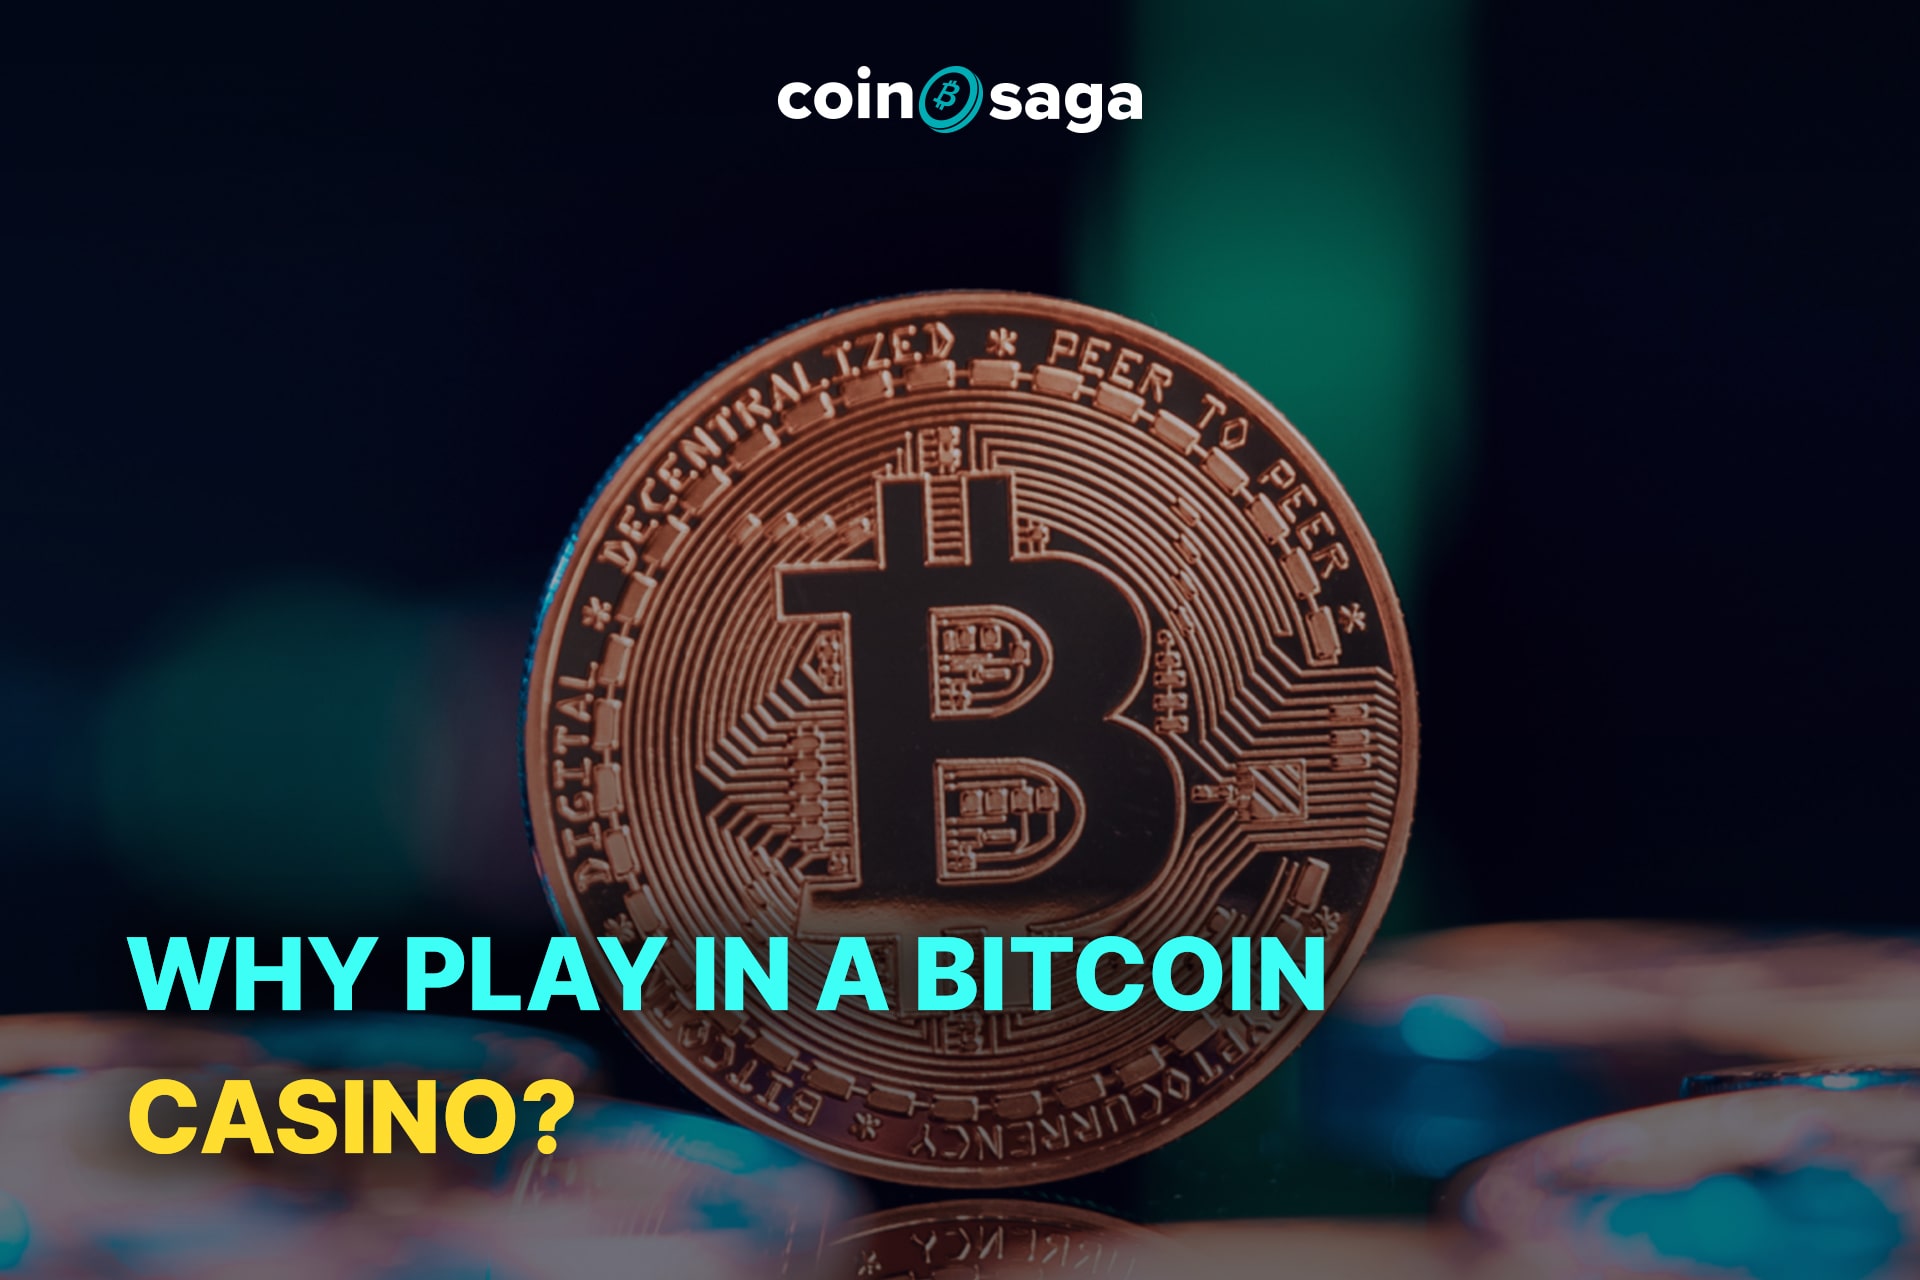 Cats, Dogs and bitcoin casino review